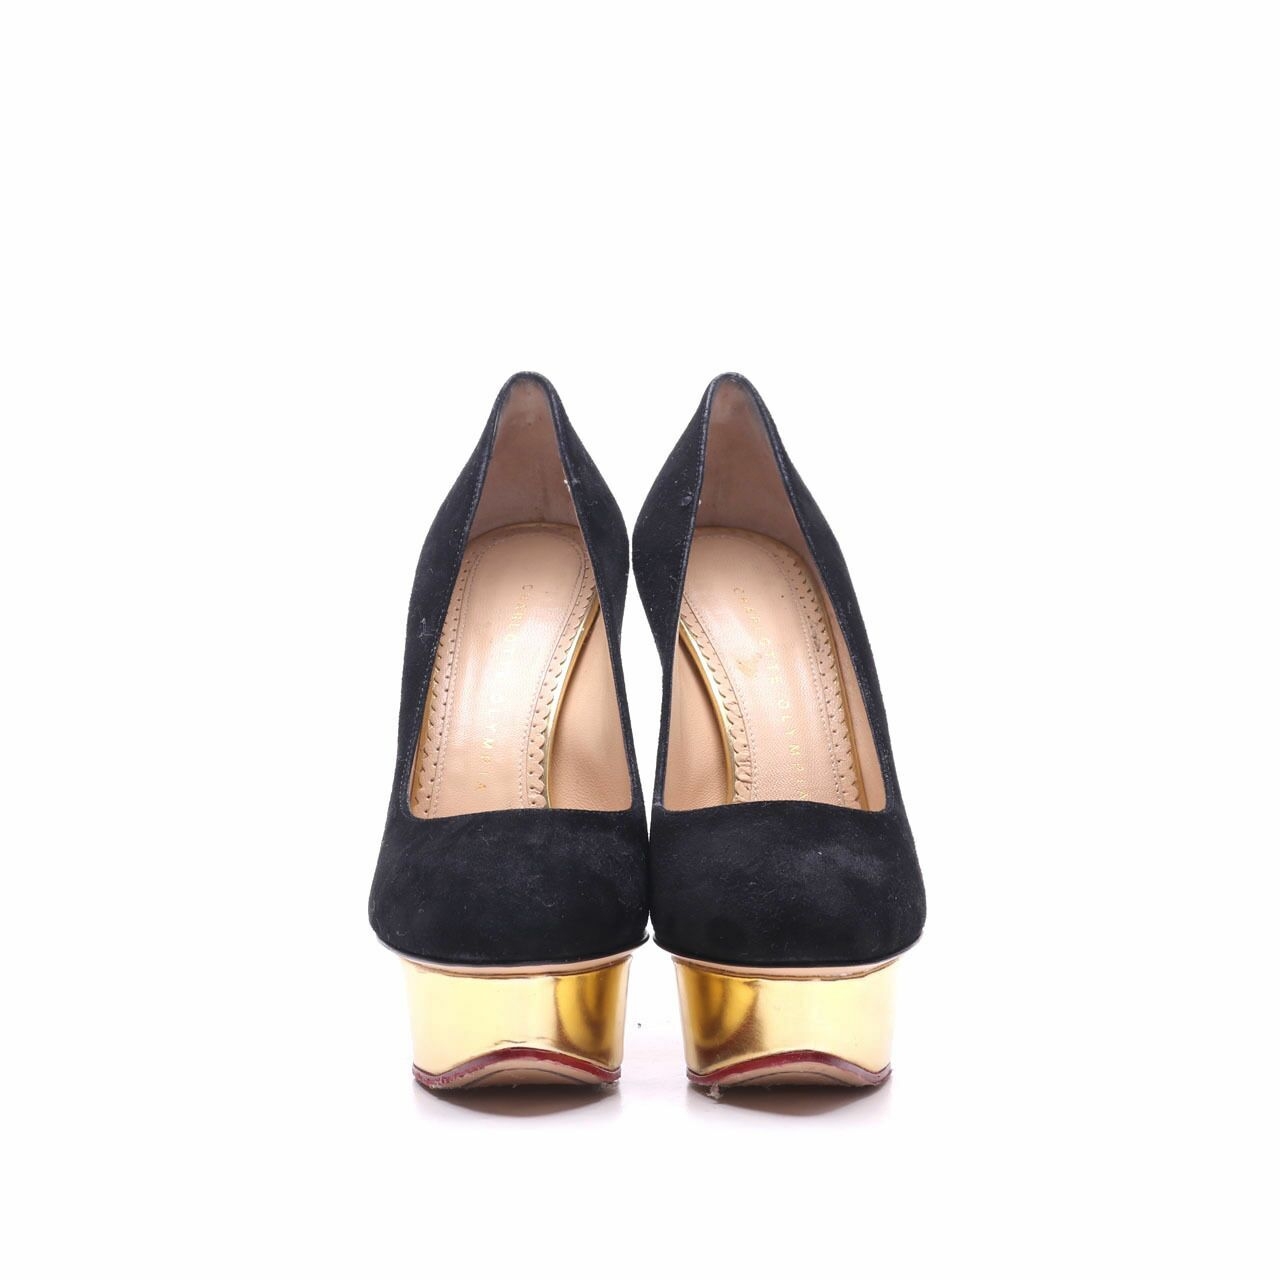 Charlotte Olympia Suede Dolly Black Heels